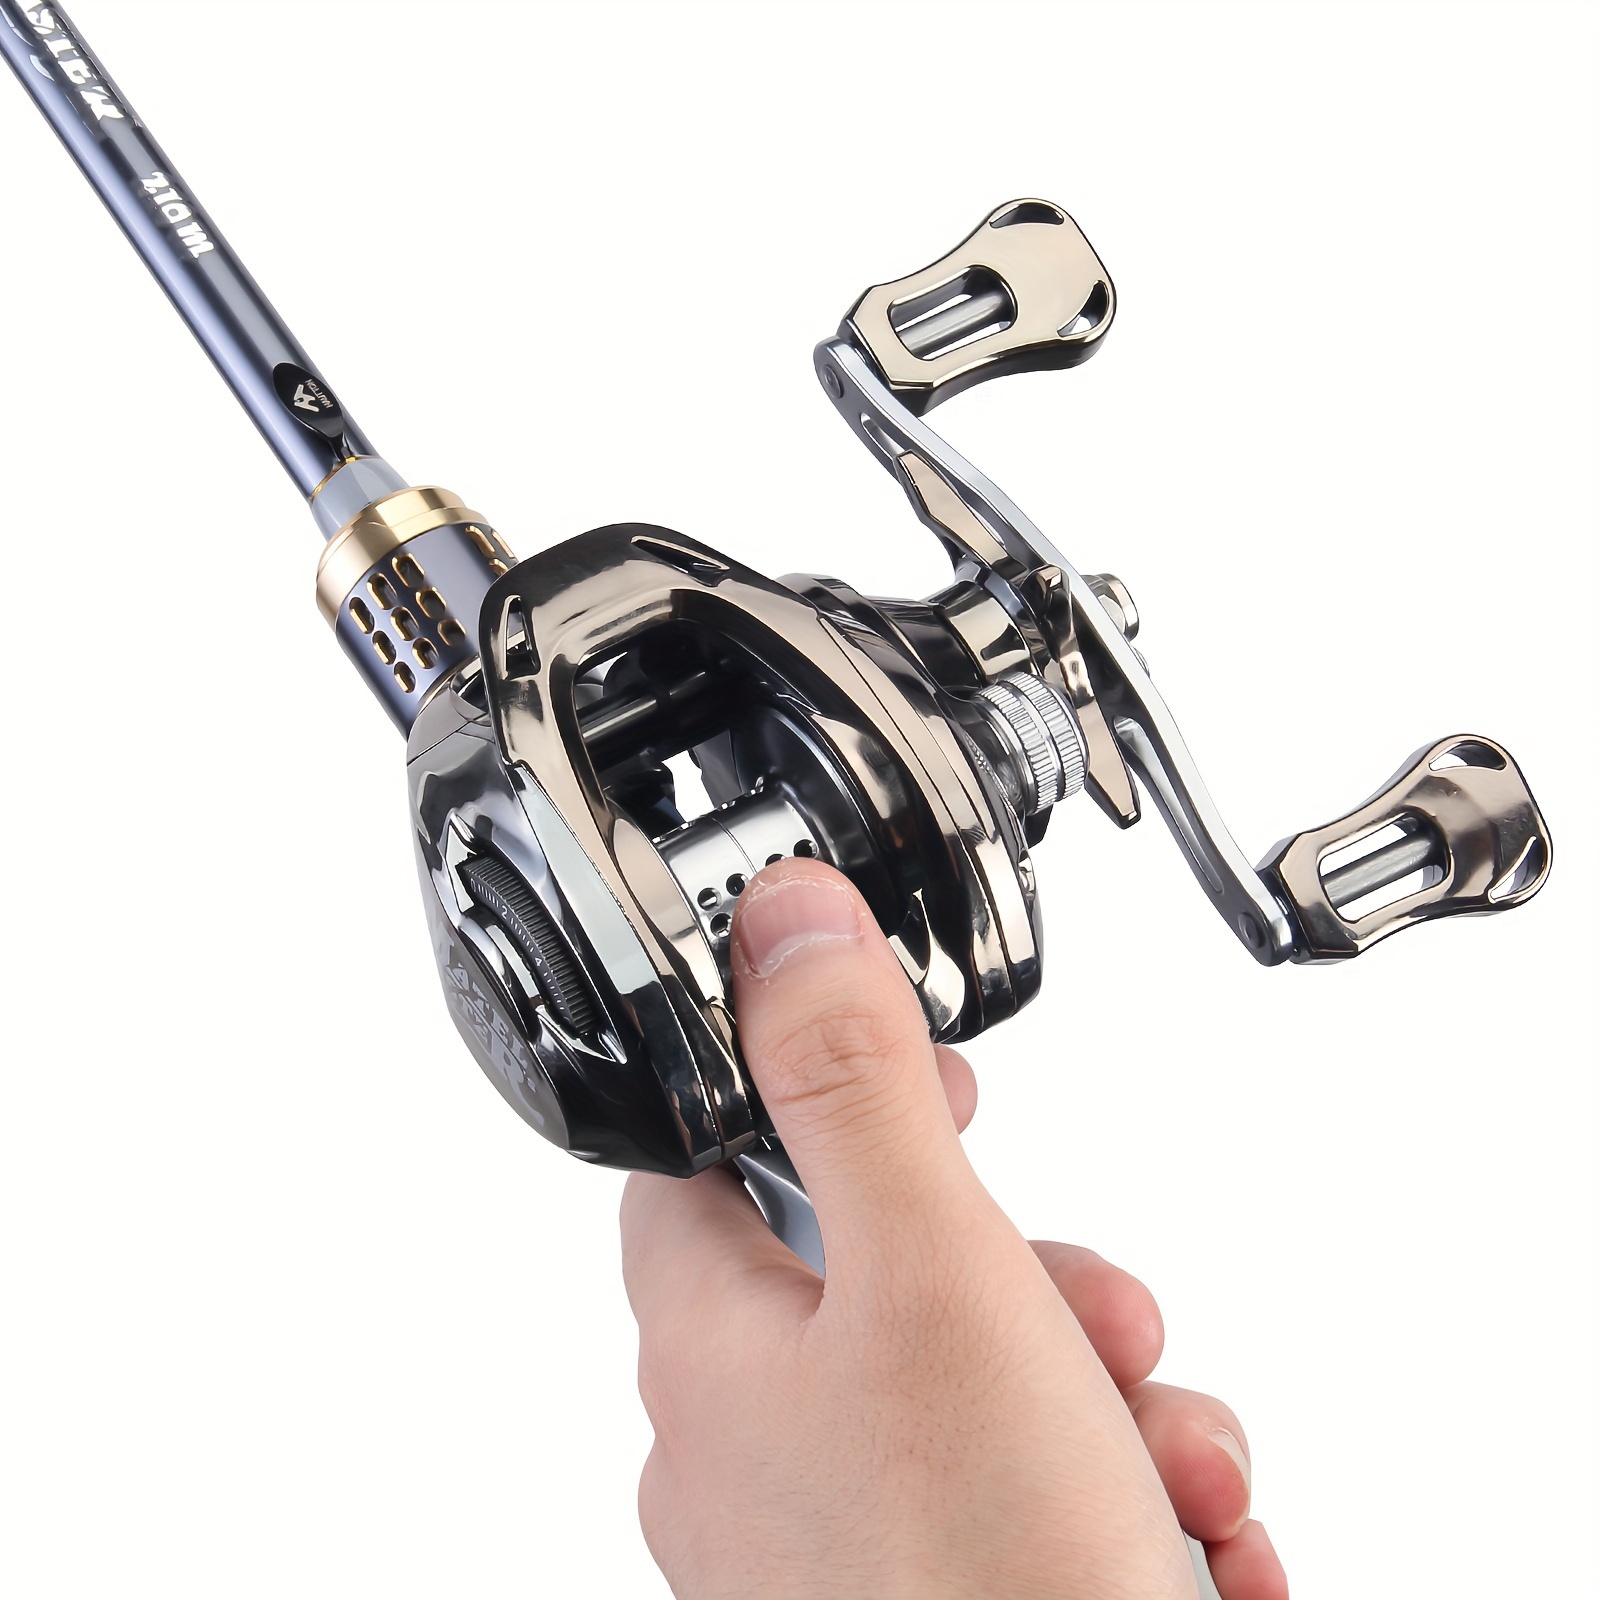 Buy Fishing Rod & Reel Combo- 6'6” Carbon Pole, Spinning Reel